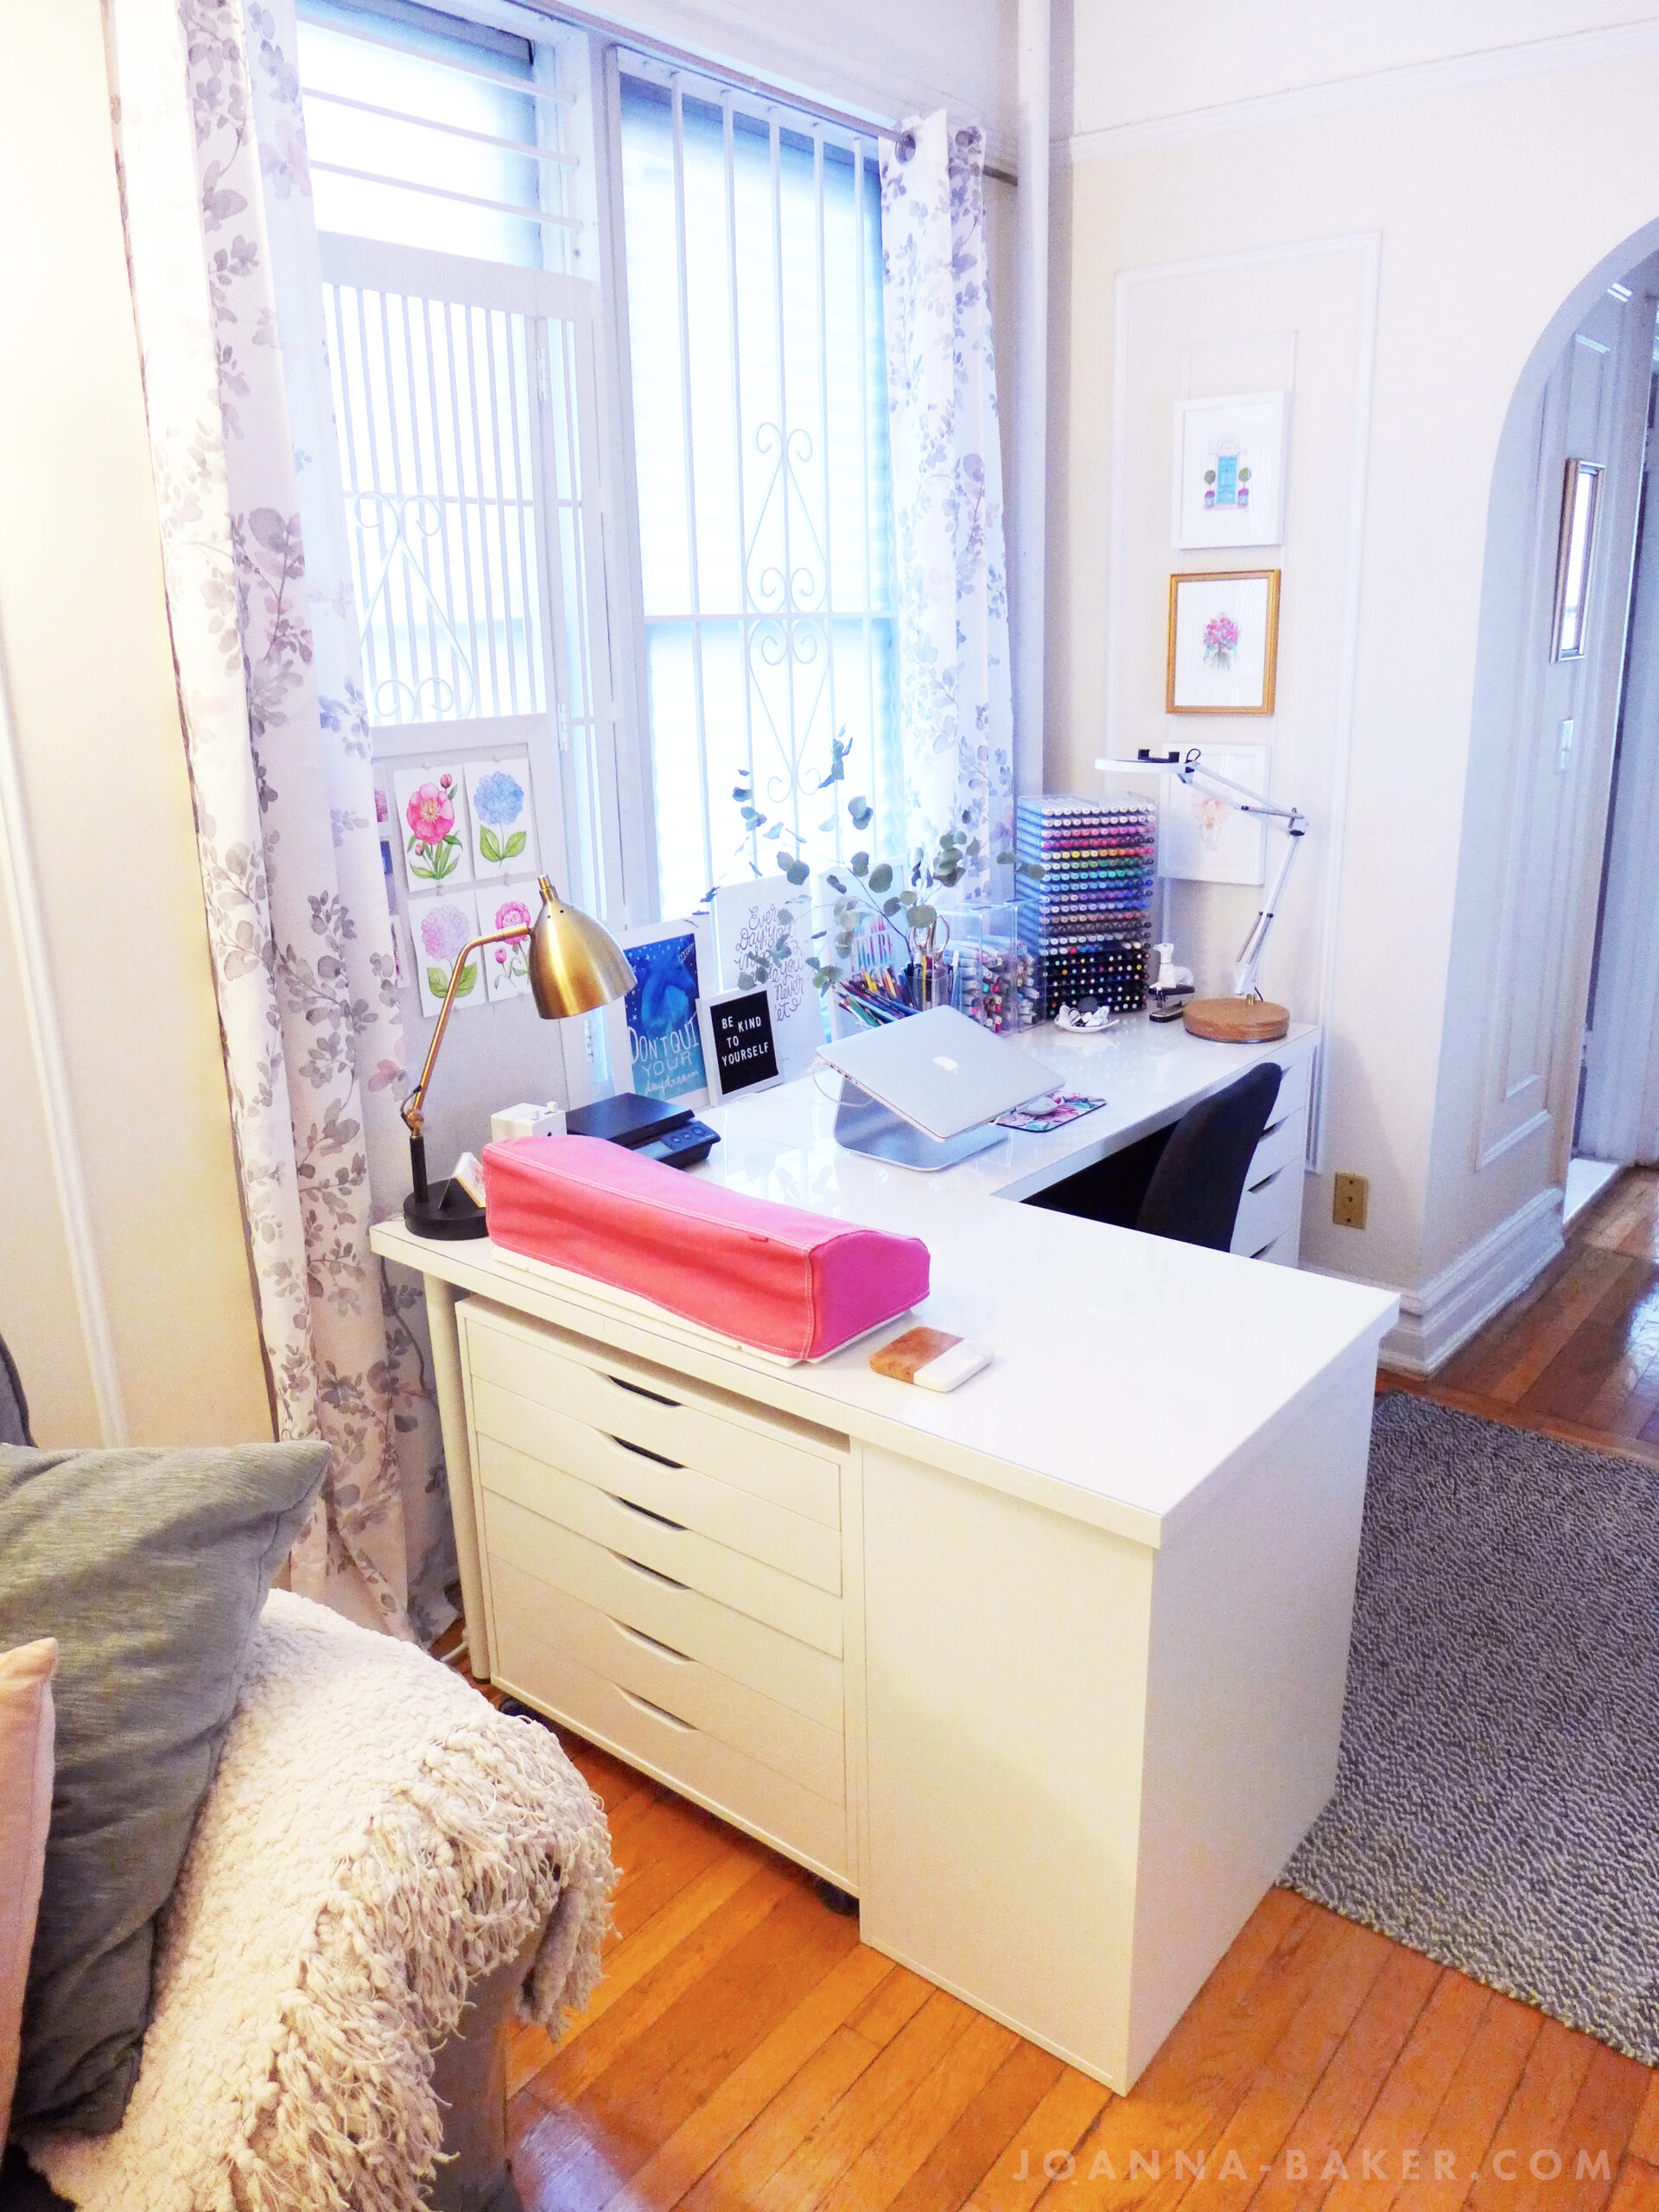 How to Create an Art Studio in a Small Space - Joanna Baker Illustration